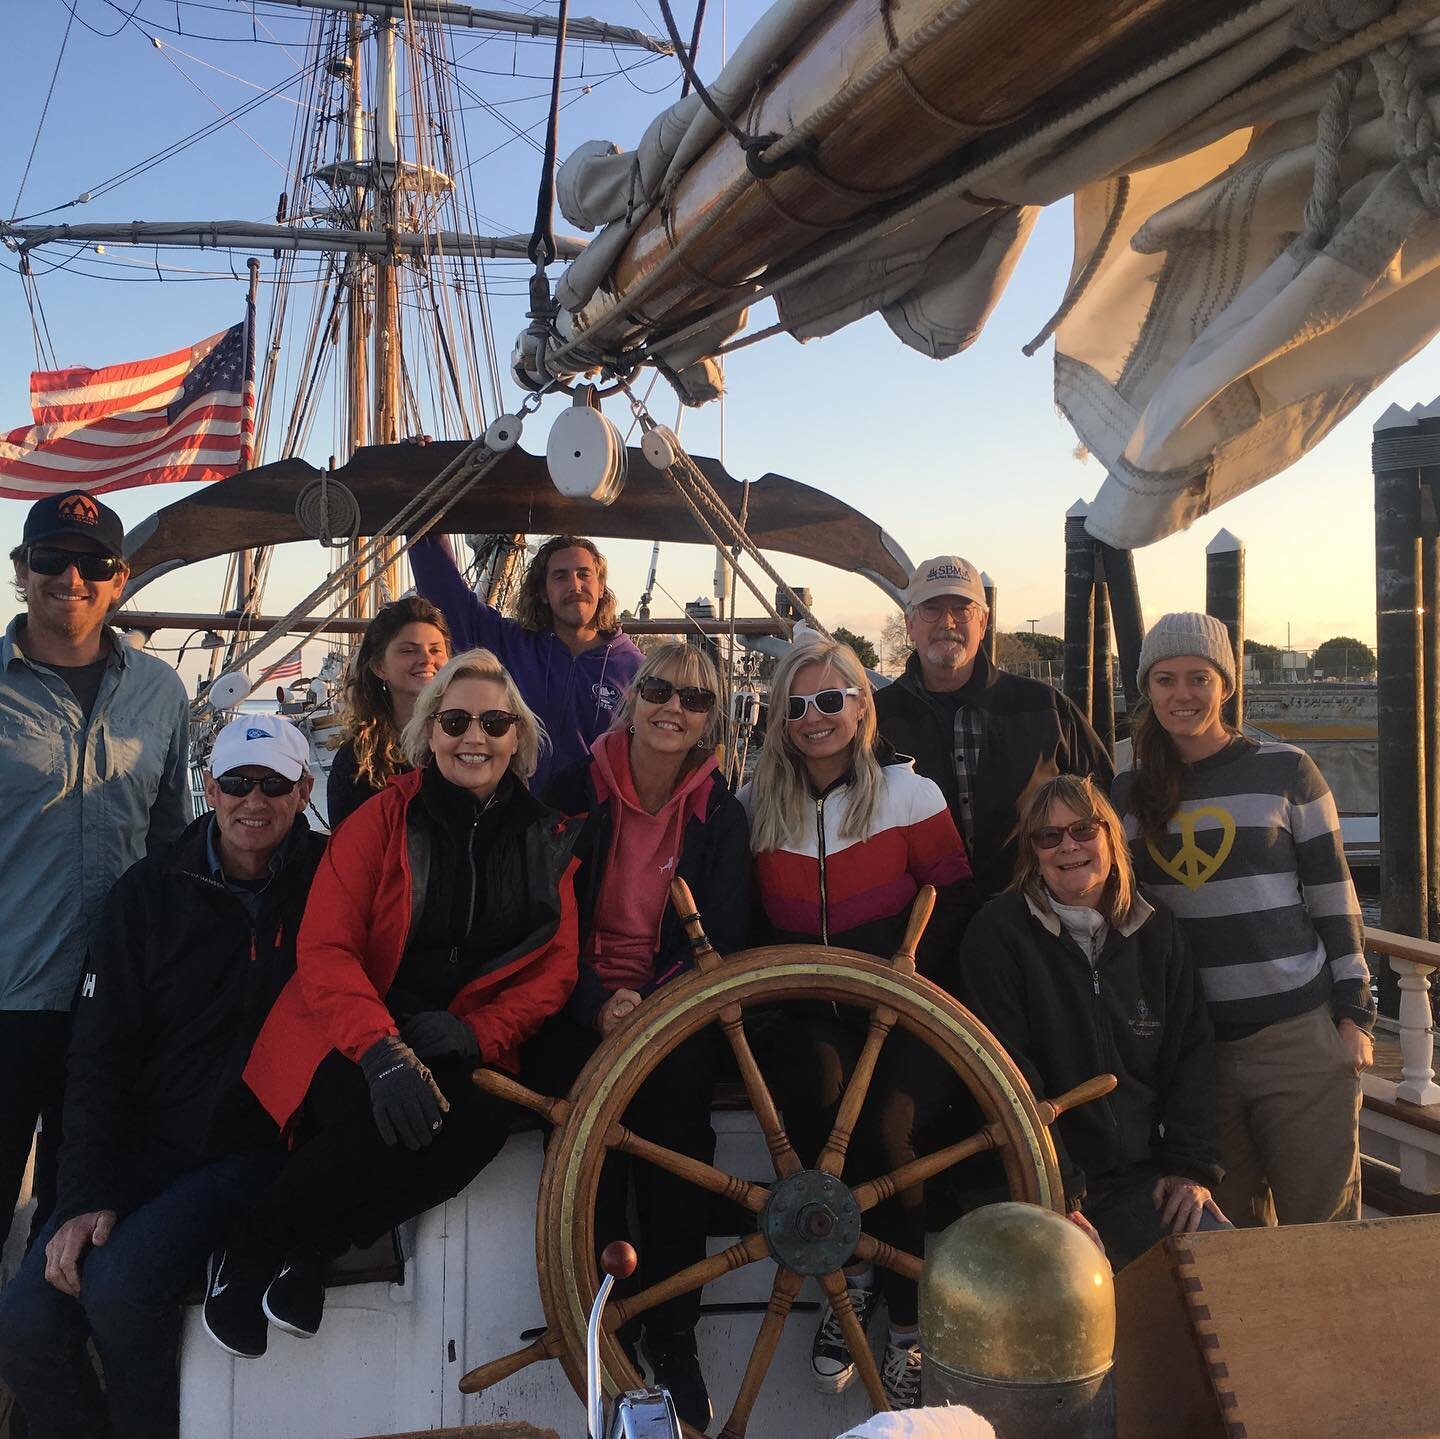 Kicking off 2020 aboard the beautiful tall ships at Los Angeles Maritime Institute 👊@tallshipschool. This Non profit is always looking for crew and volunteers to further their mission of empowering youth to discover greater potential through lessons